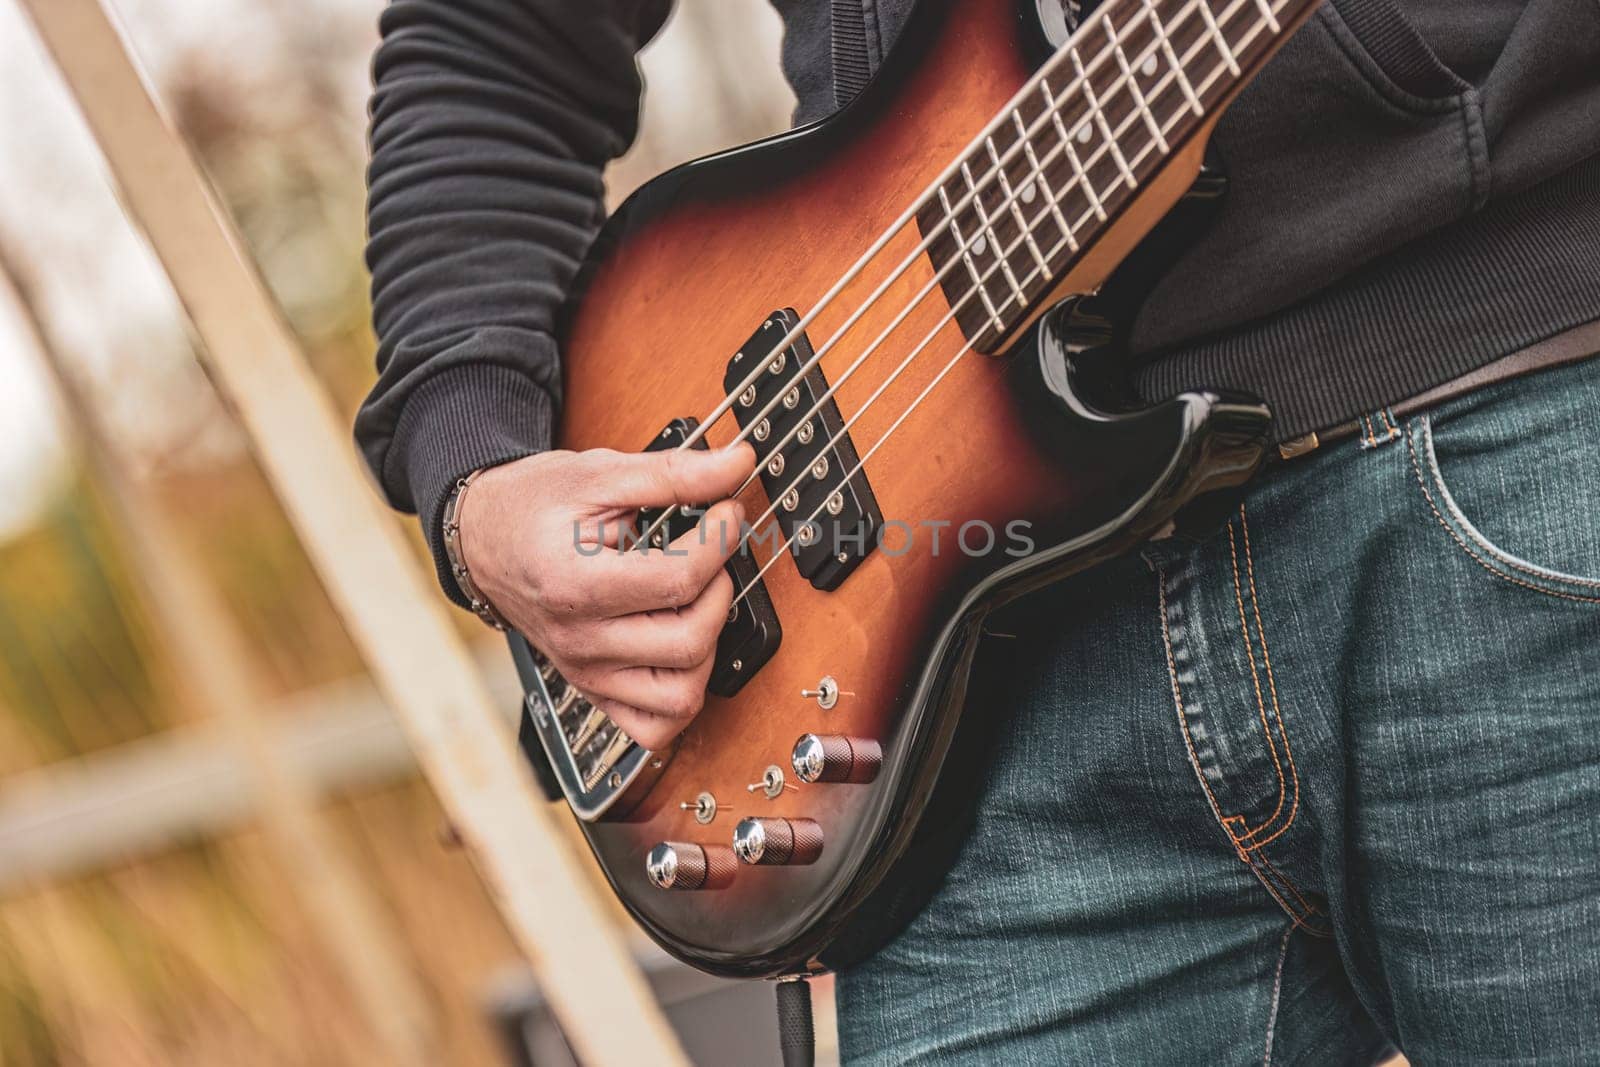 A man holding a bass guitar in his hands, ready to play music.